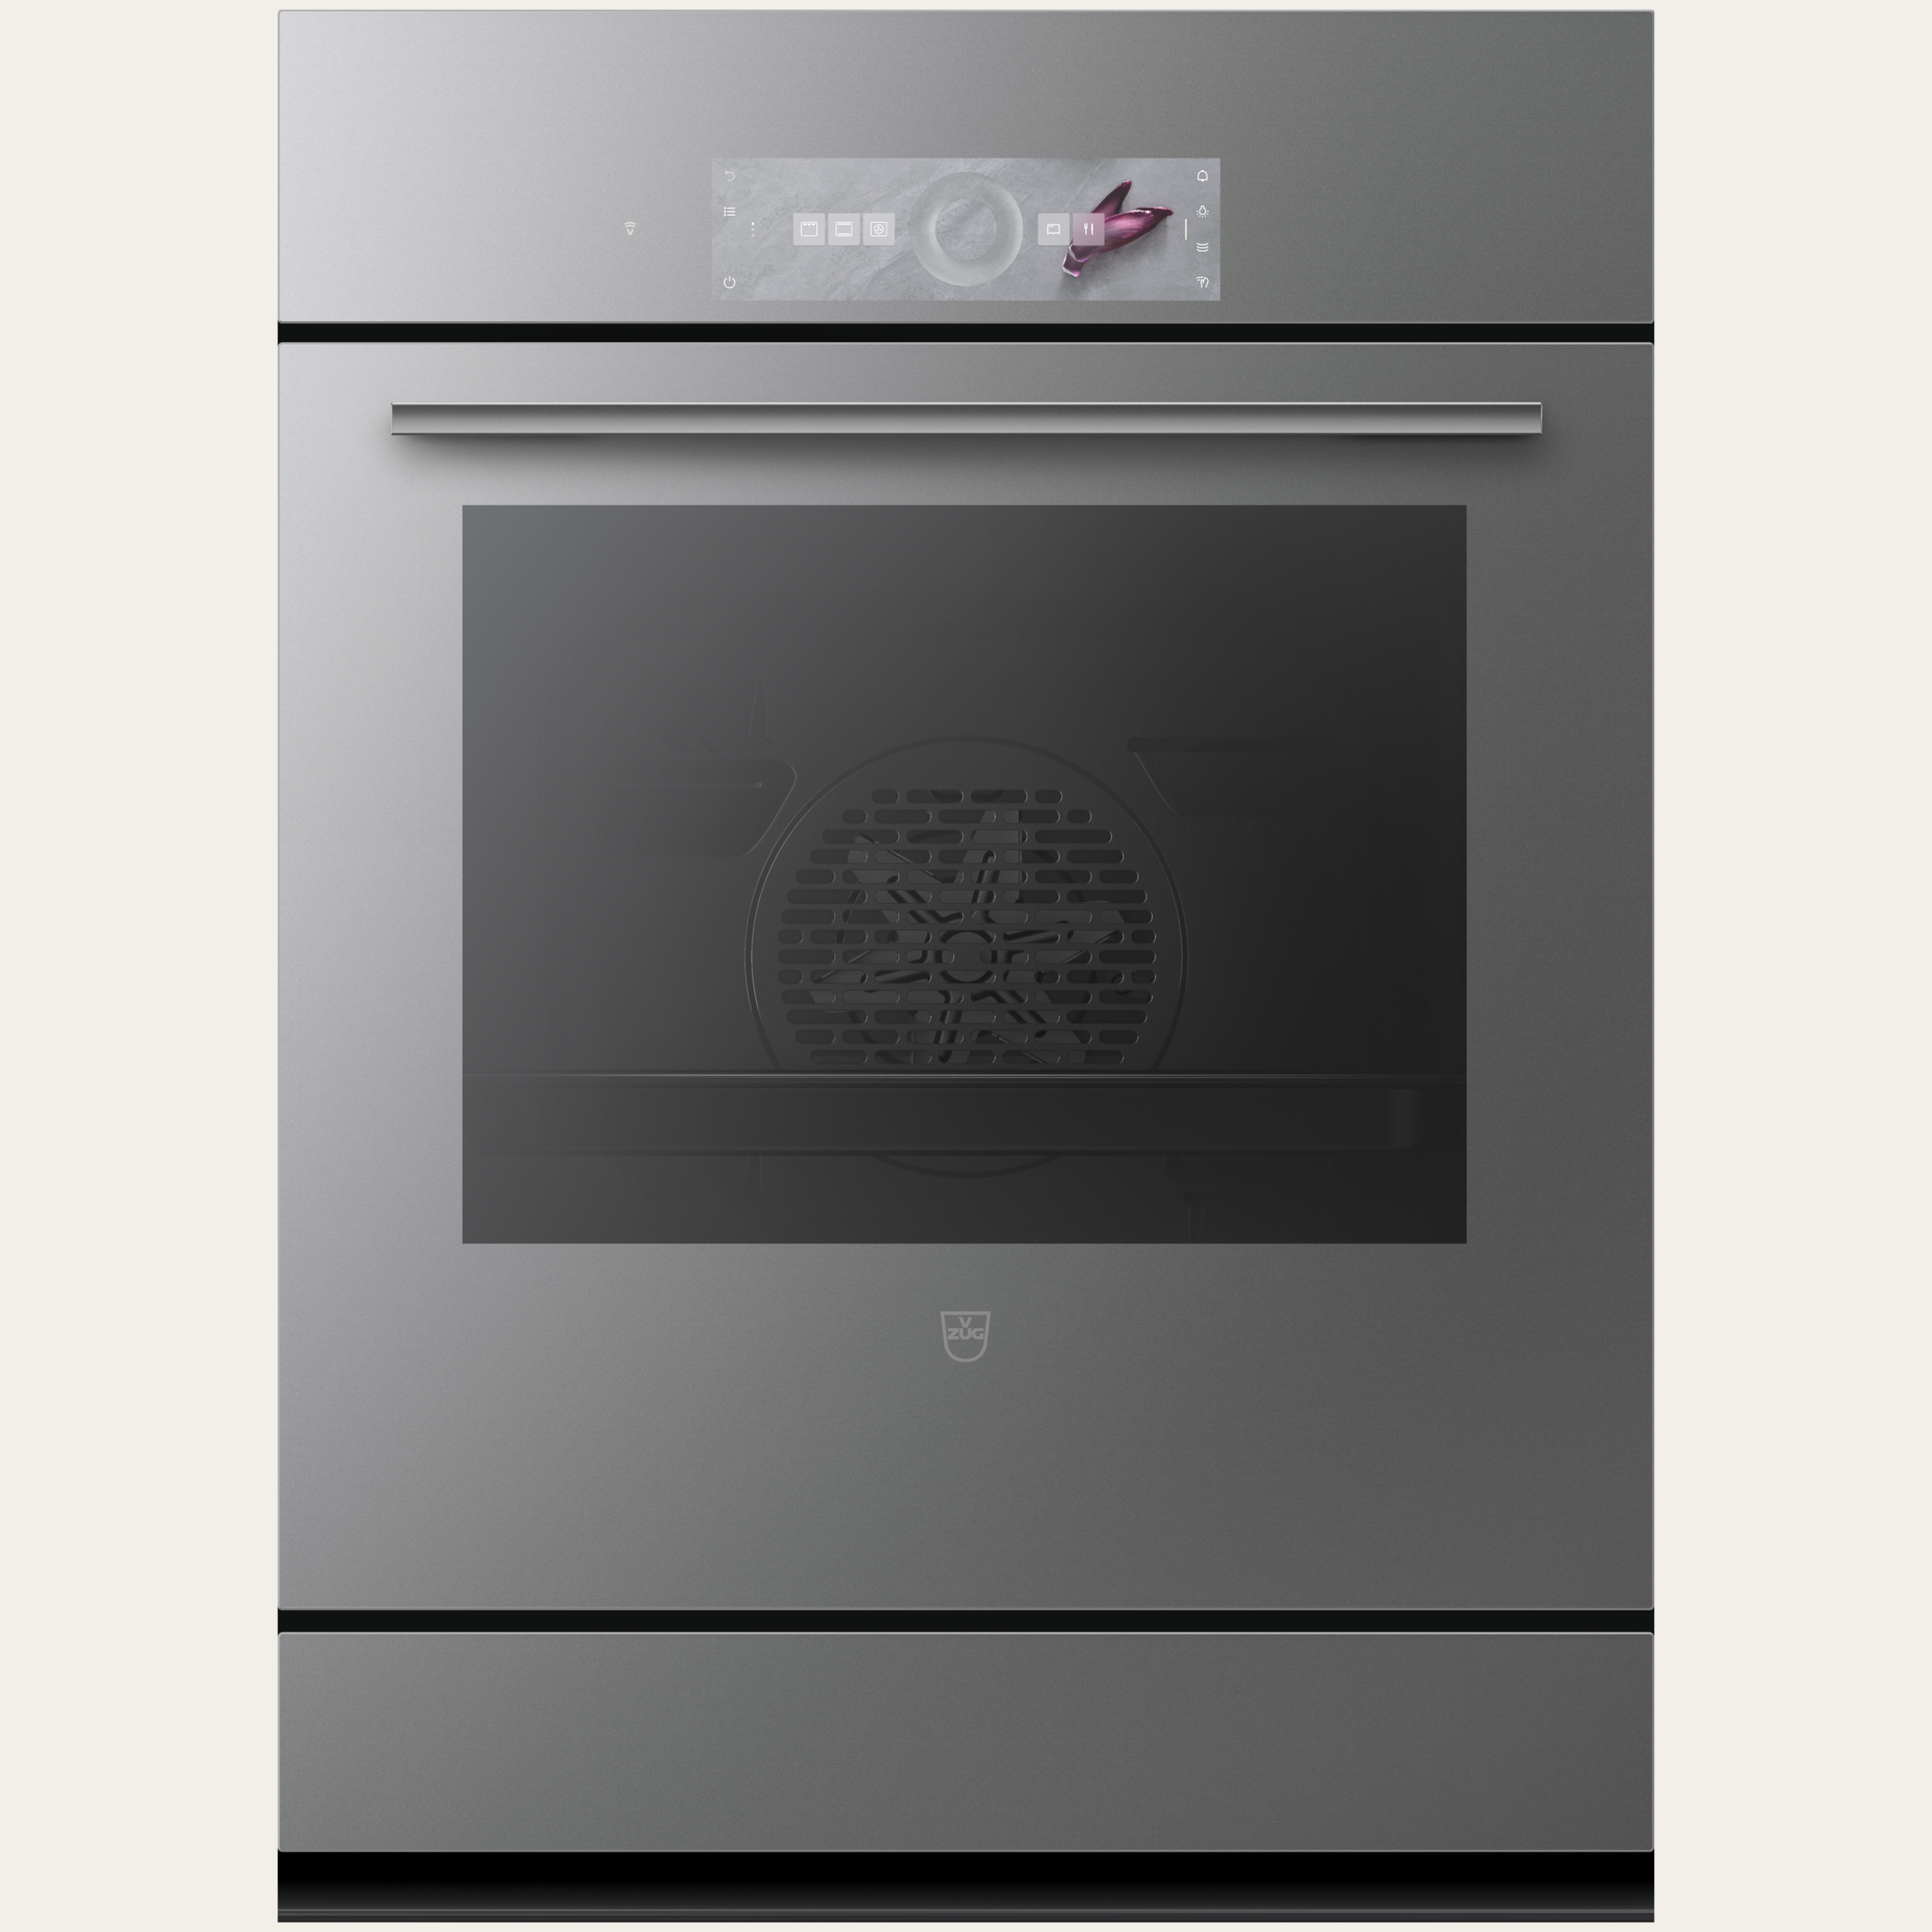 V-ZUG Oven Combair V6000 7UPC, Standard width: 55 cm, Standard height: 76.2 cm, Platinum mirror glass, Installation in floor unit, Touchscreen with CircleSlider, V-ZUG-Home, Heatable appliance drawer, Pyrolytic self-cleaning